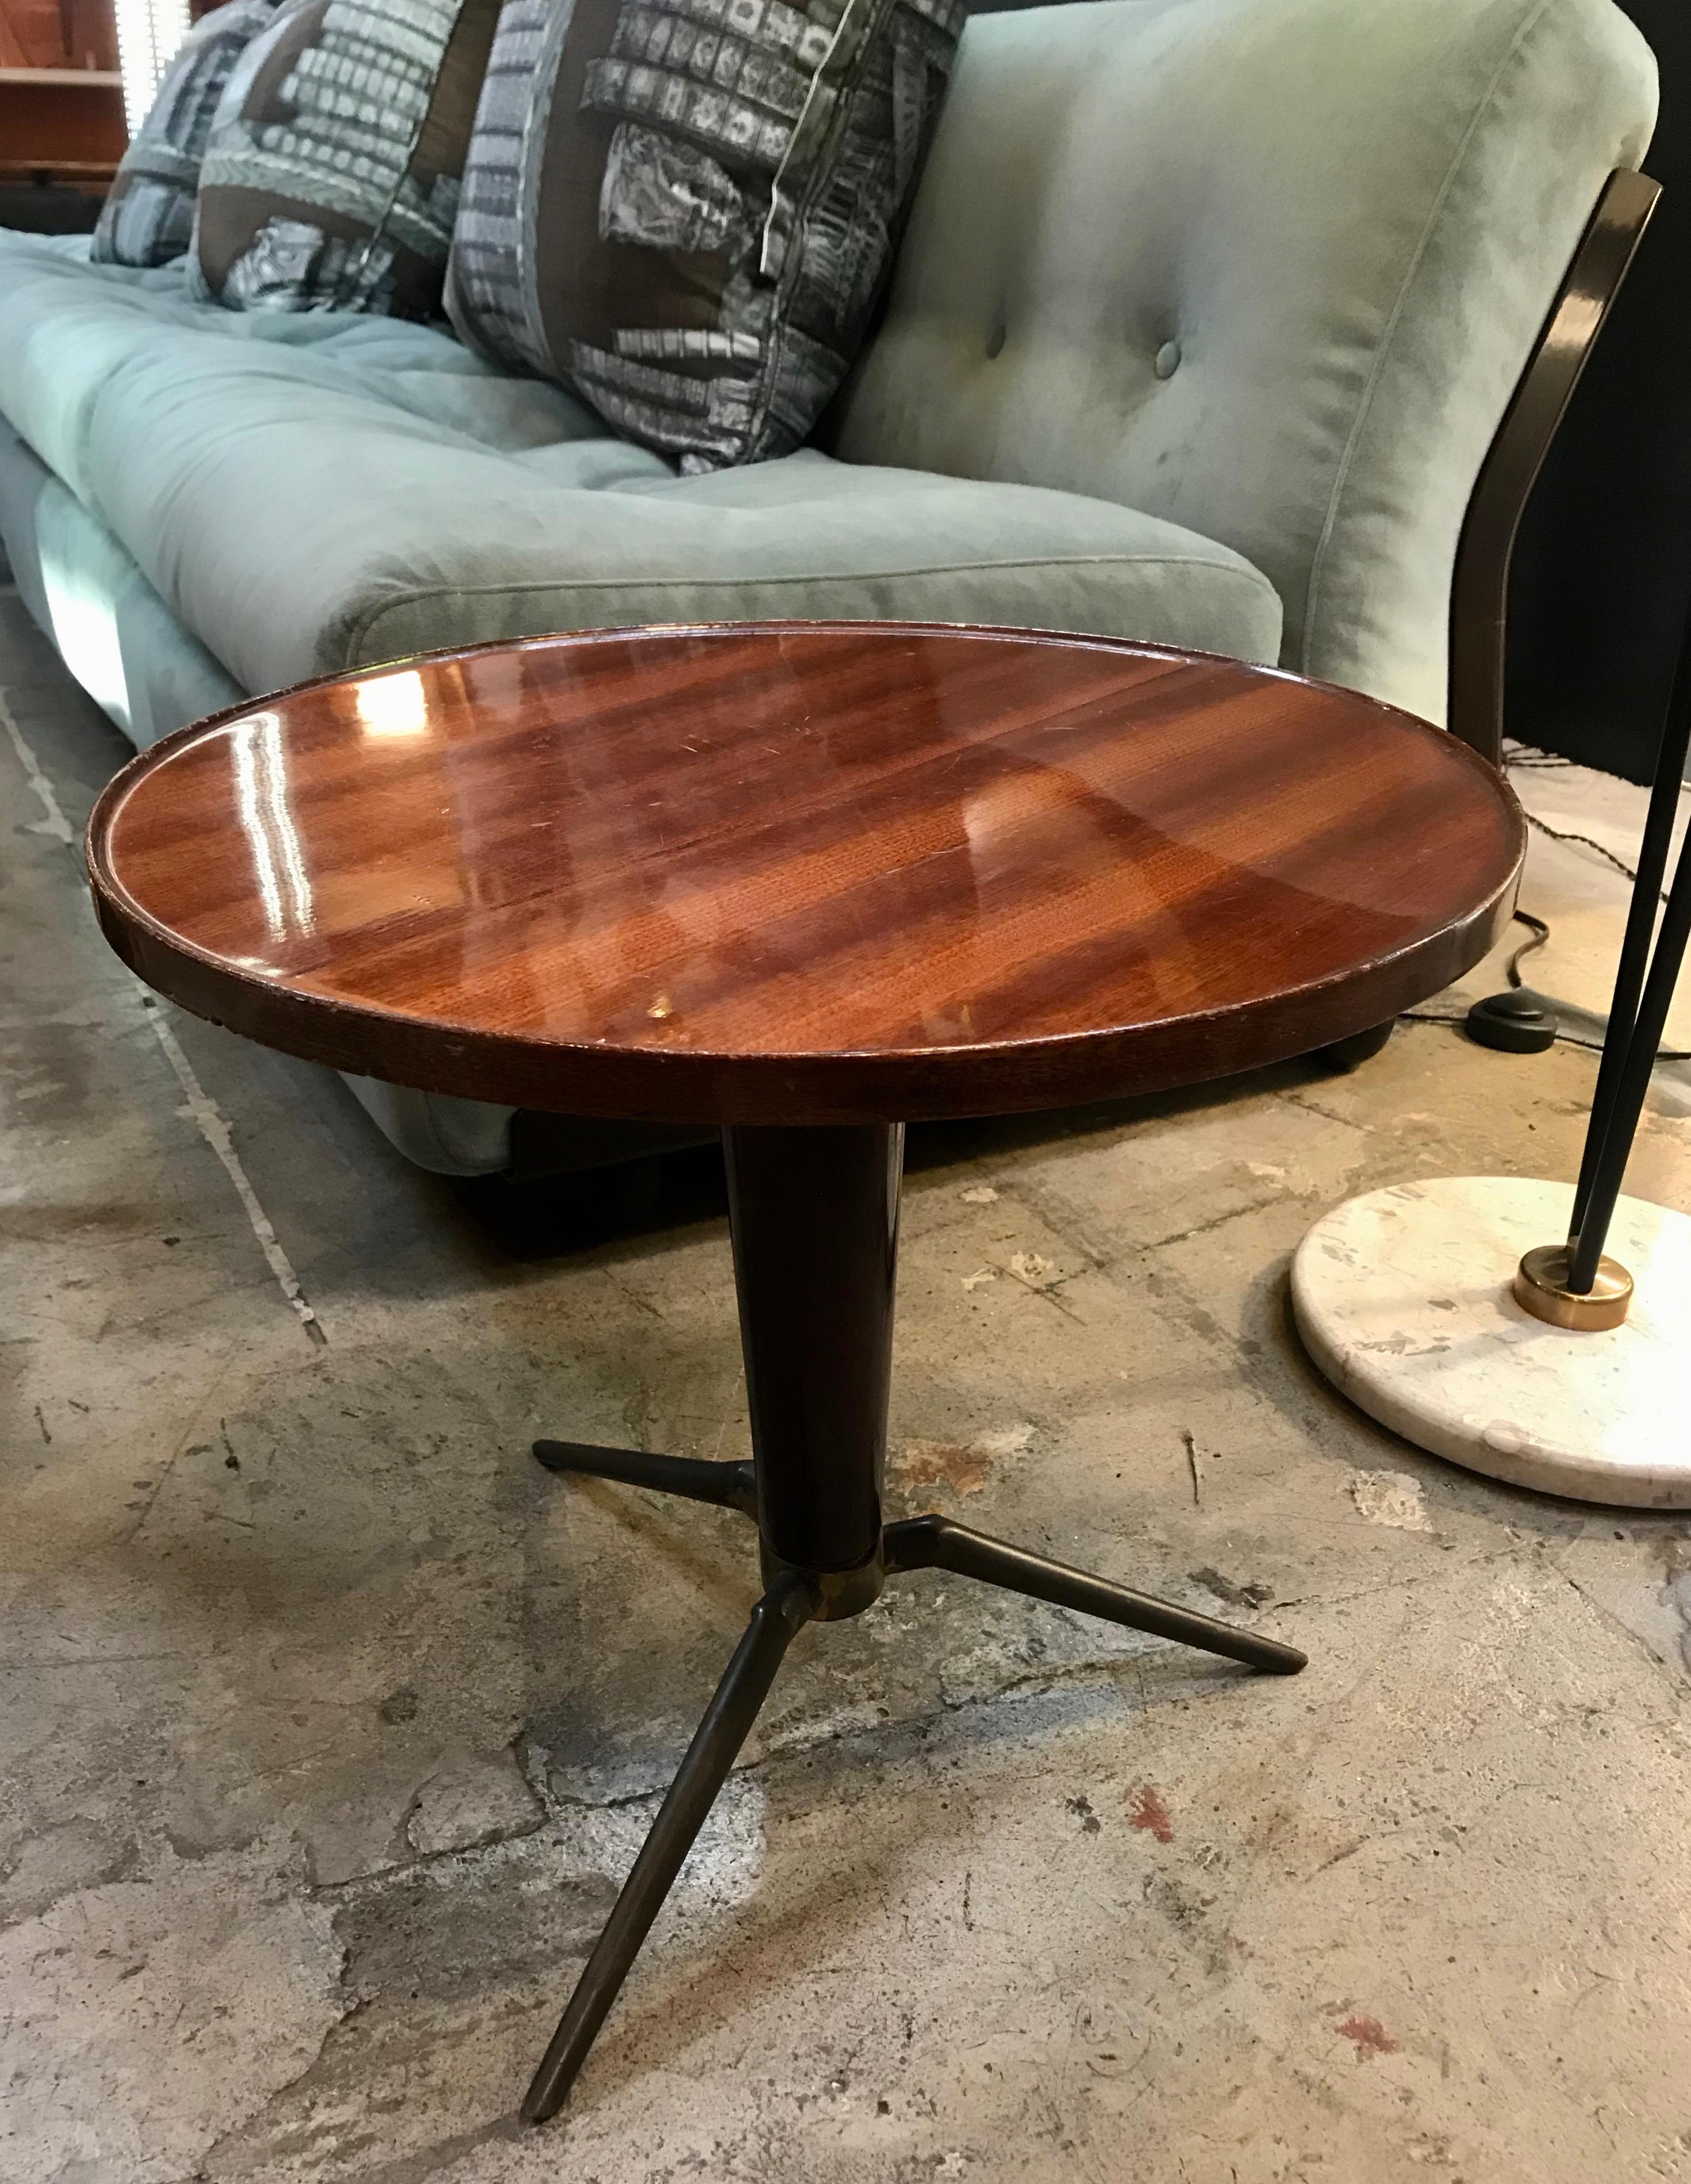 Italian-made coffee table produced in the 1960s.
Round top in veneered wood.
Metal base with spider-shaped legs in brass.
Original patina.